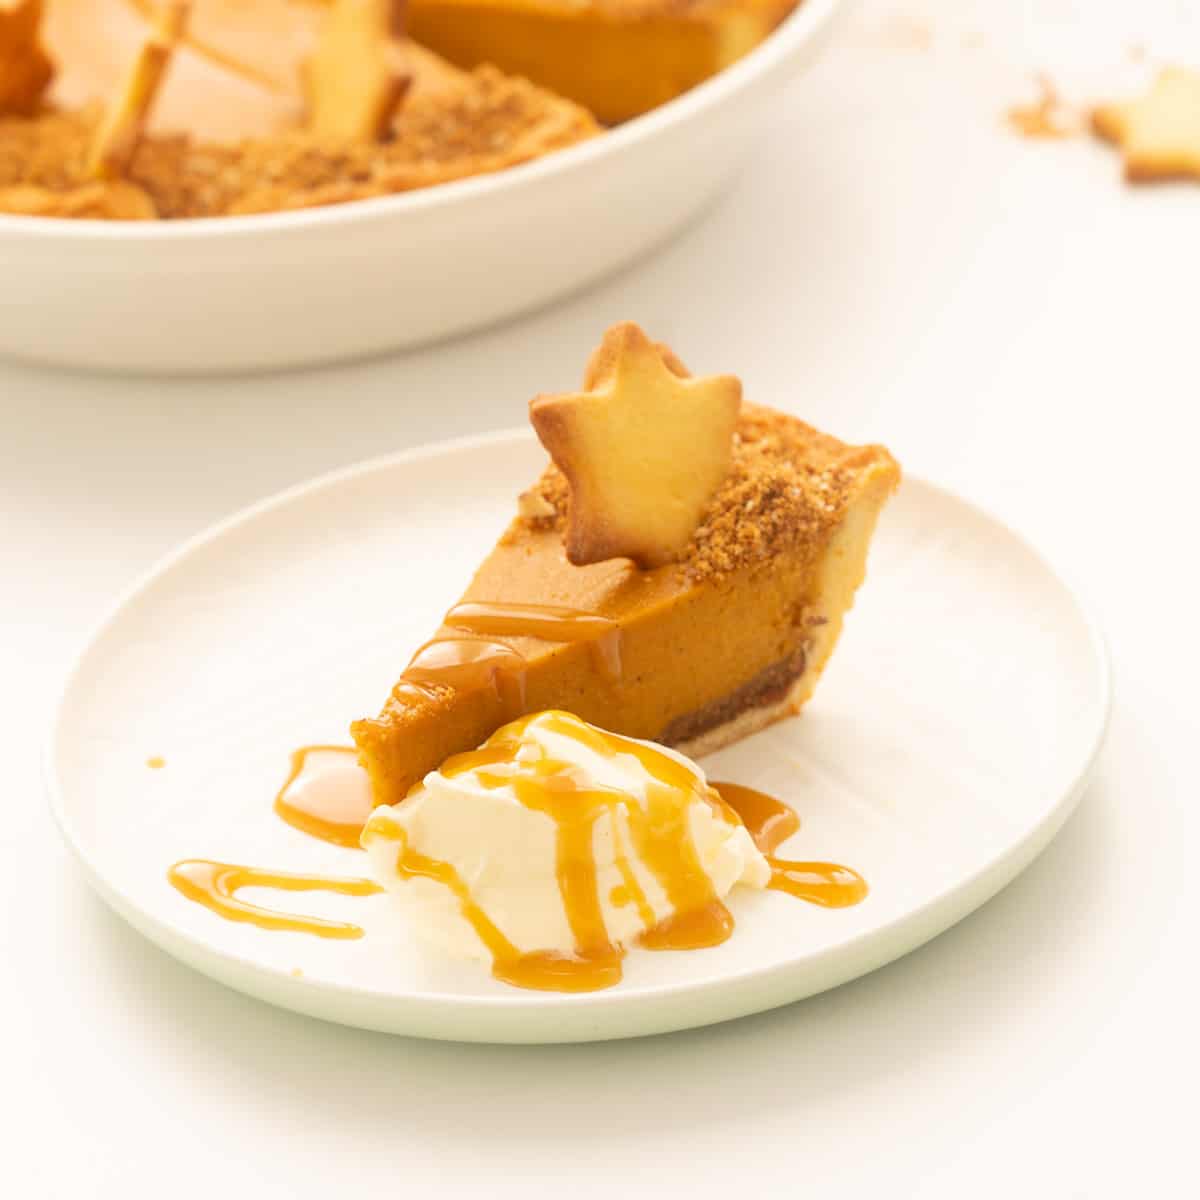 A slice of sweet potato pie decorated with a pastry star, whipped cream and caramel sauce.